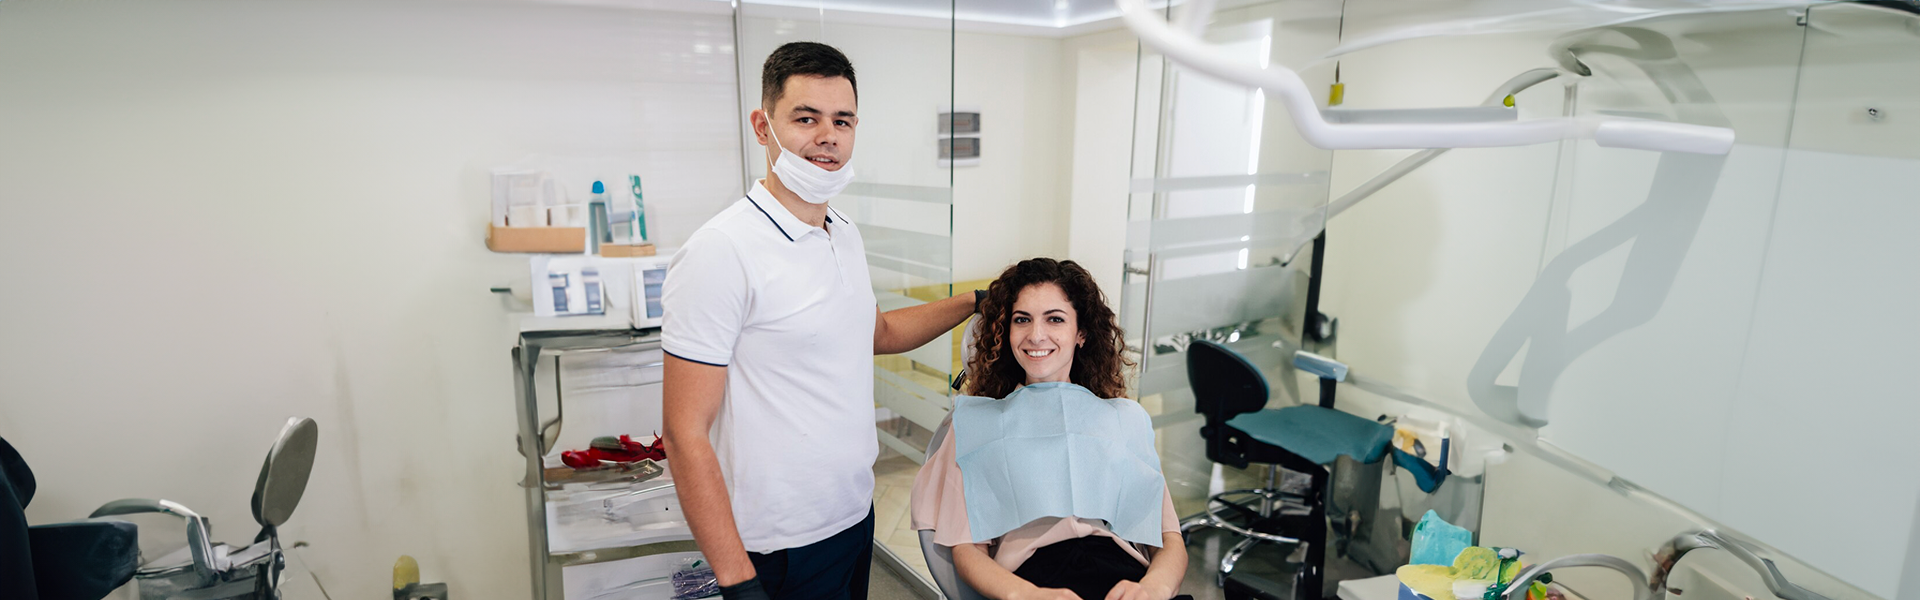 How to Find the Best Dental Clinic Near Me?